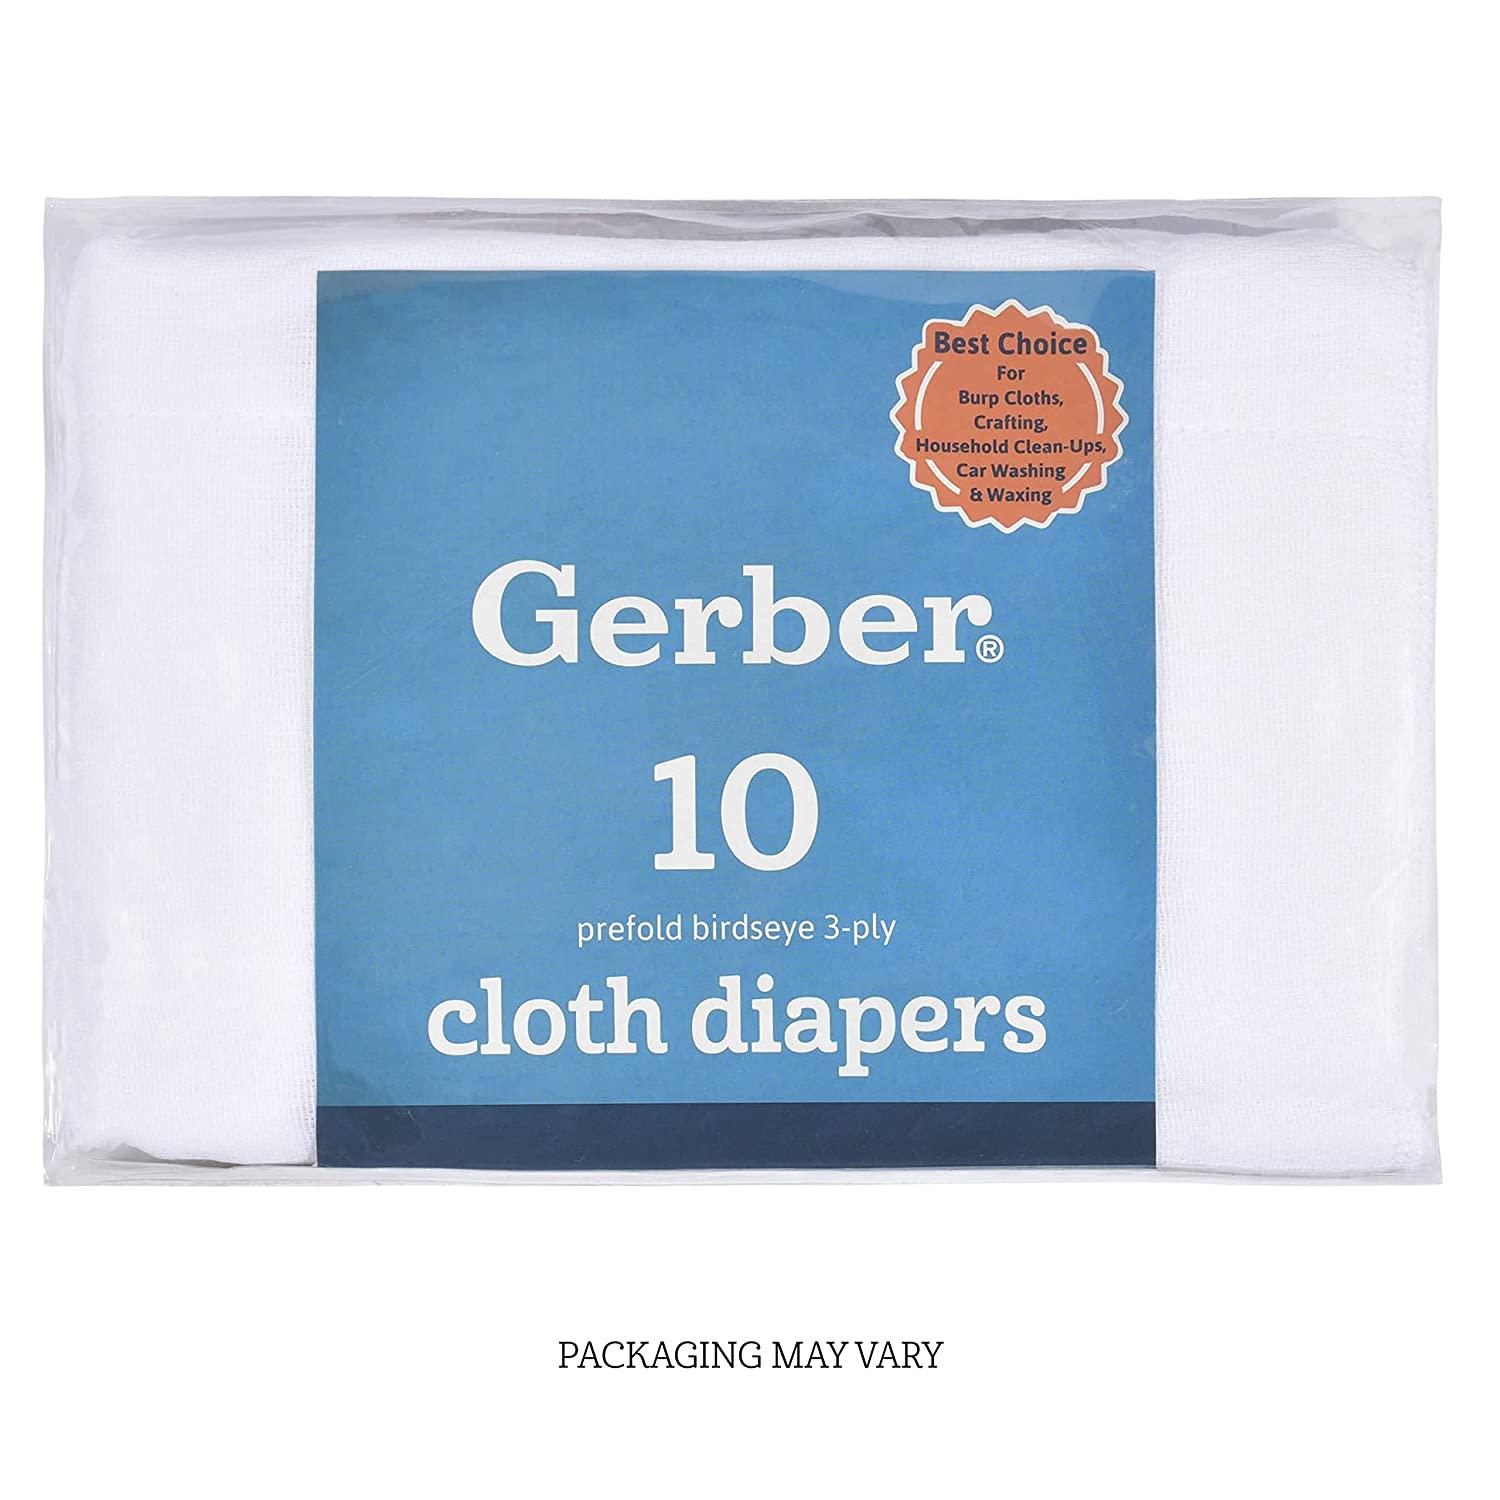 Gerber 6 Count Washcloth, White